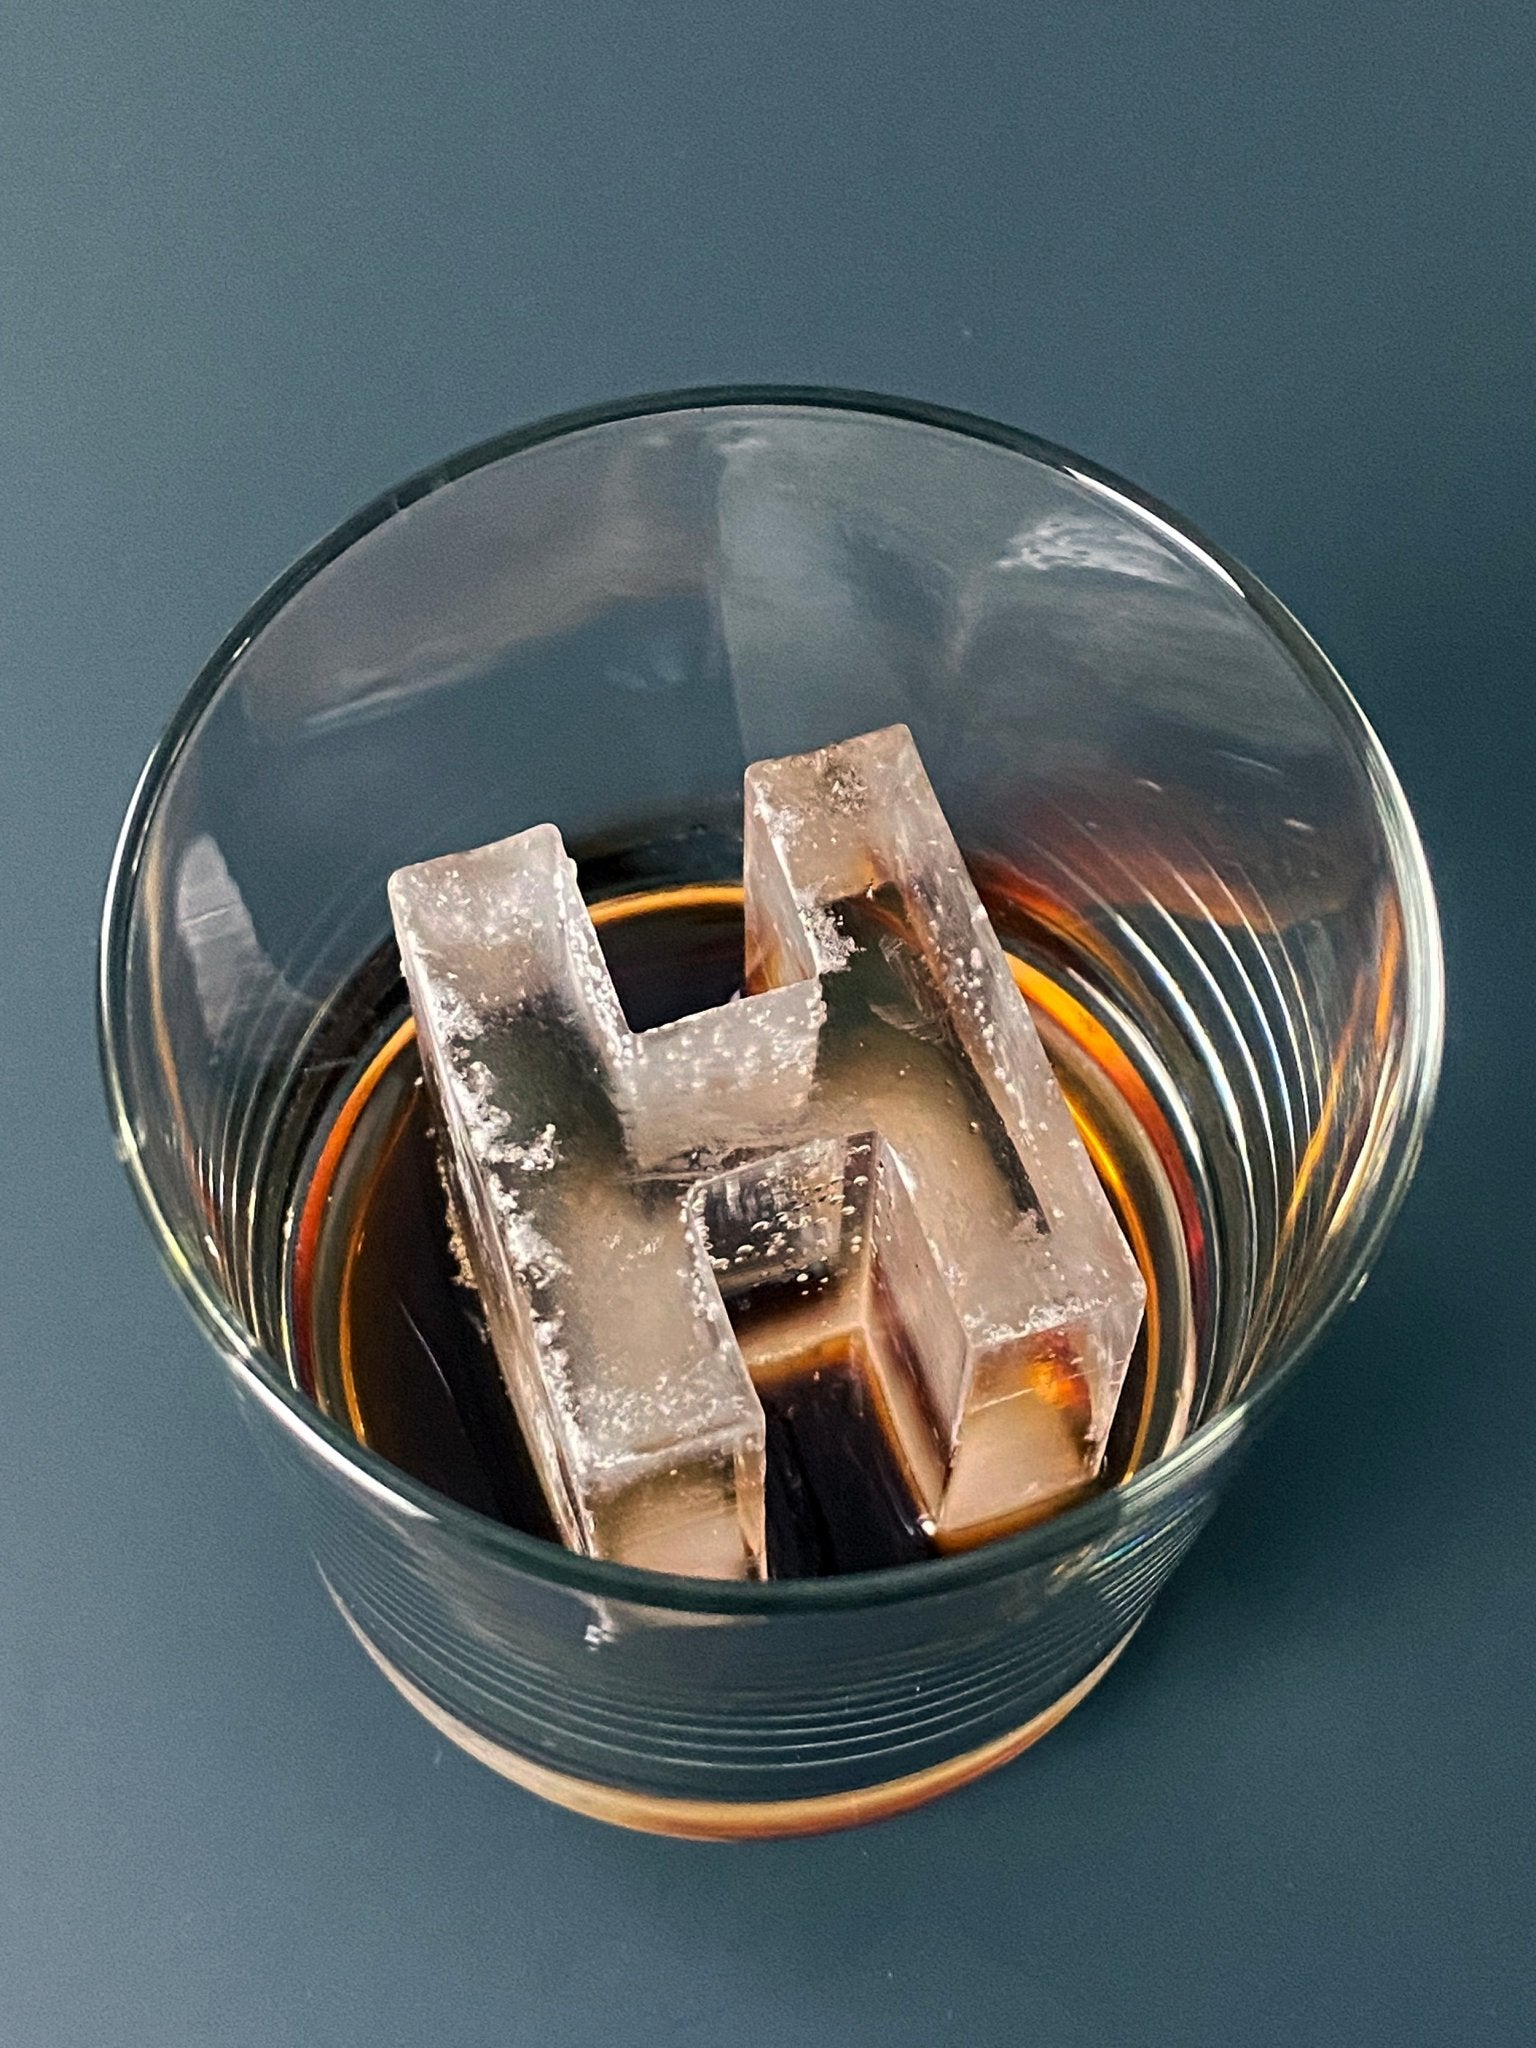 The Best Ice Molds for Cocktails